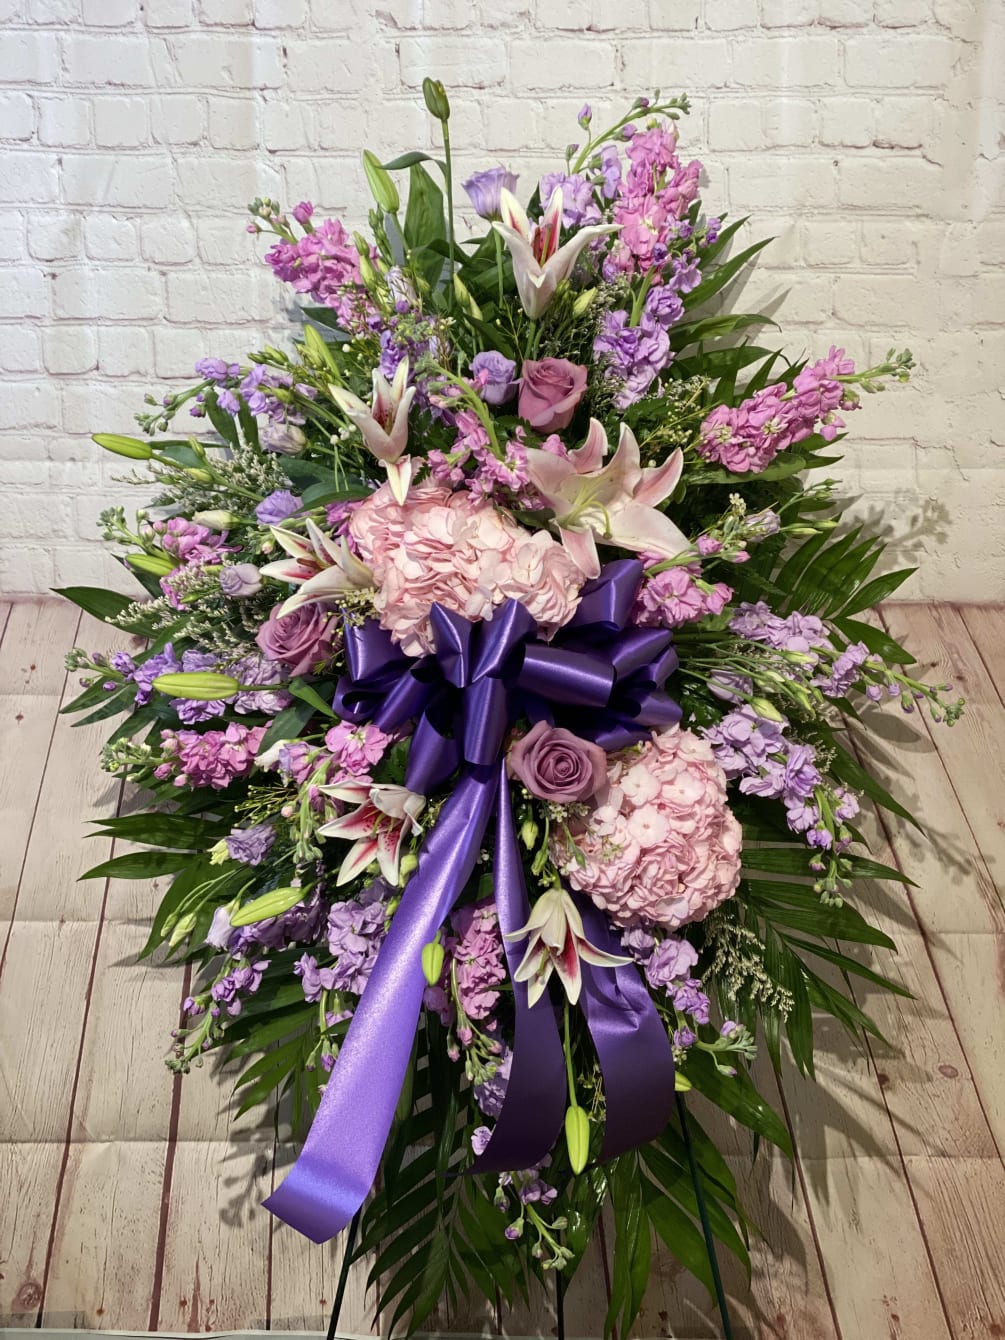 This gorgeous standing sympathy spray combines lilies, hydrangea, and dahlias in pinks